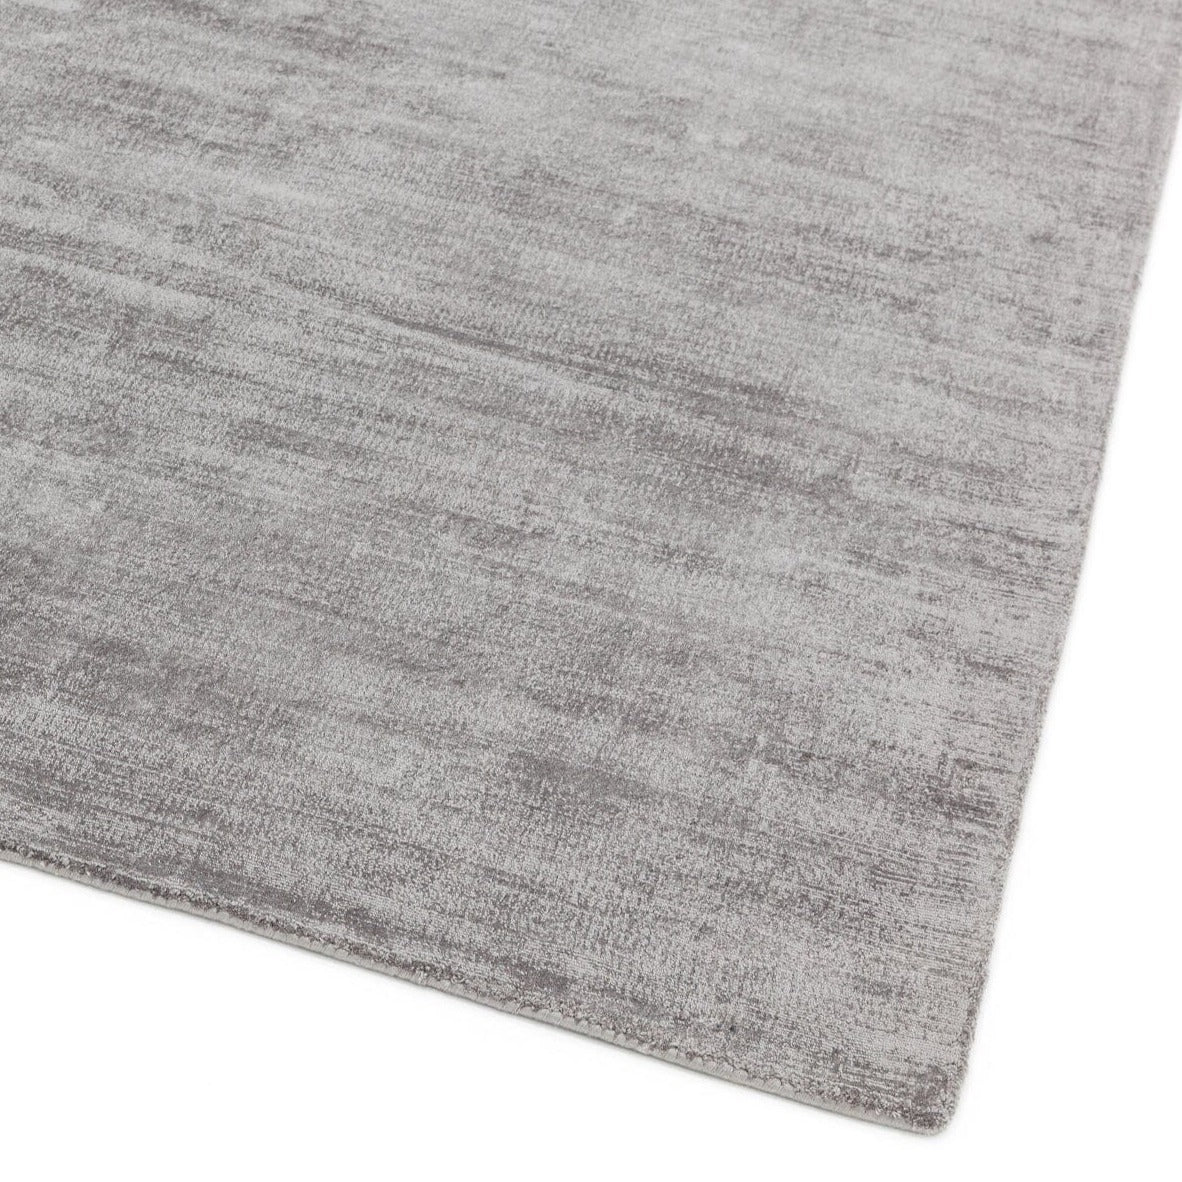 Asiatic Carpets Blade Hand Woven Rug Silver - 160 x 230cm